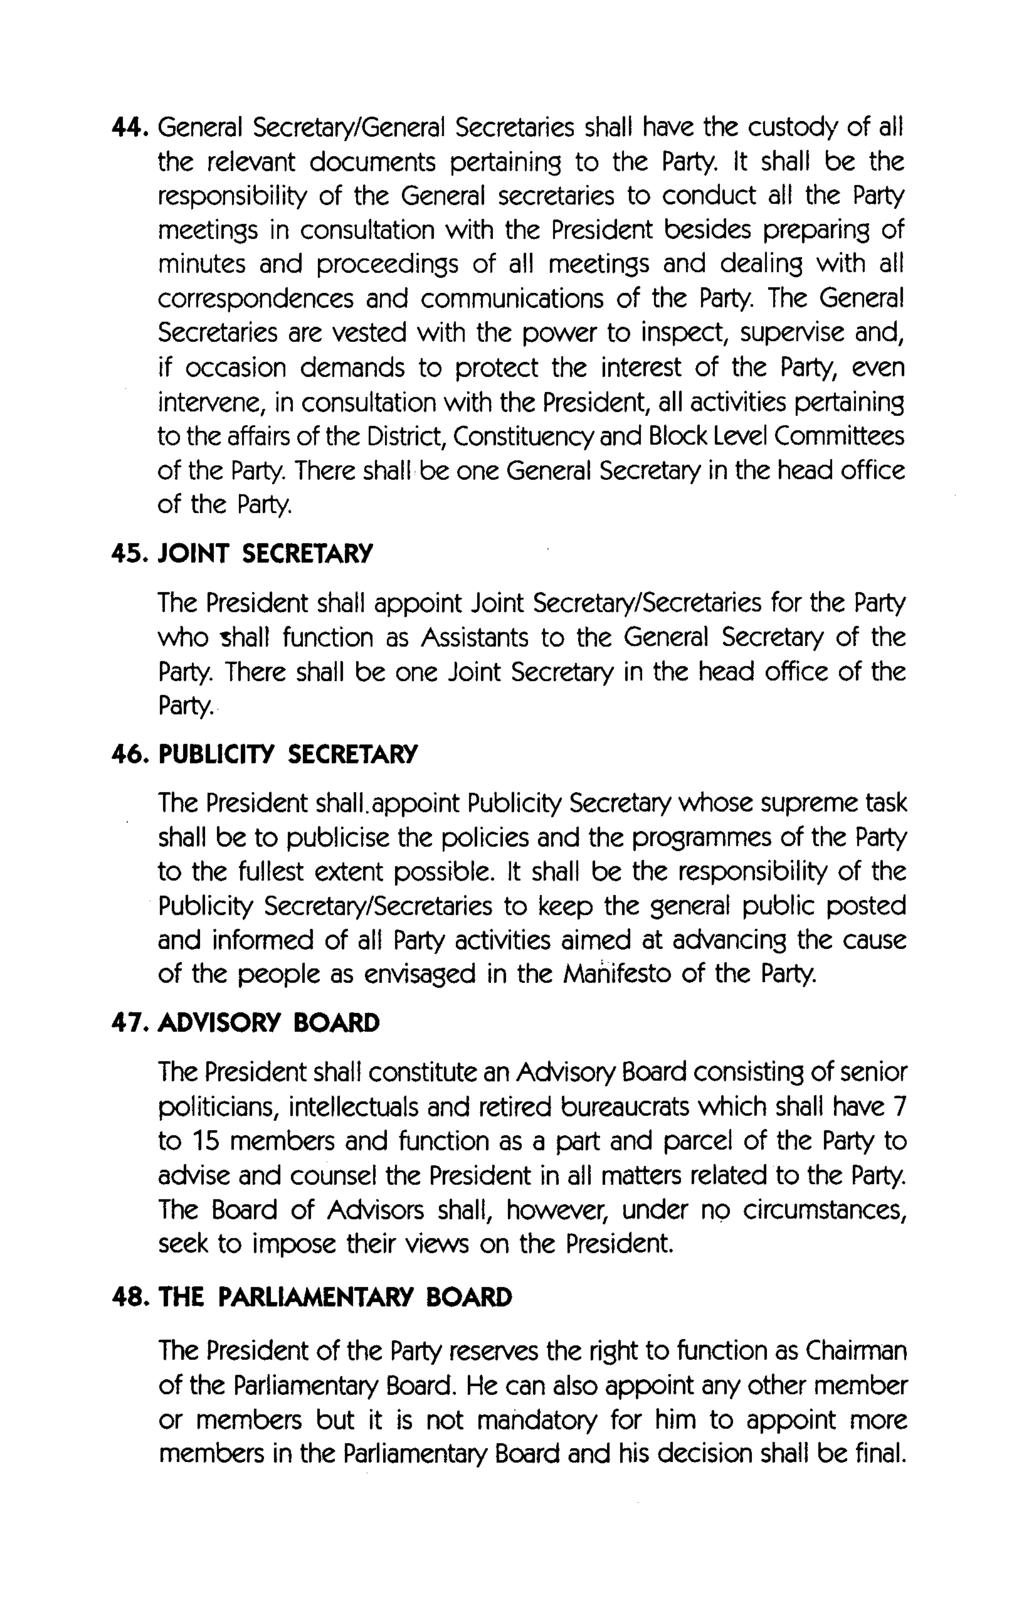 44. General Secretary/General Secretaries shall have the custody of all the relevant documents pertaining to the Party.